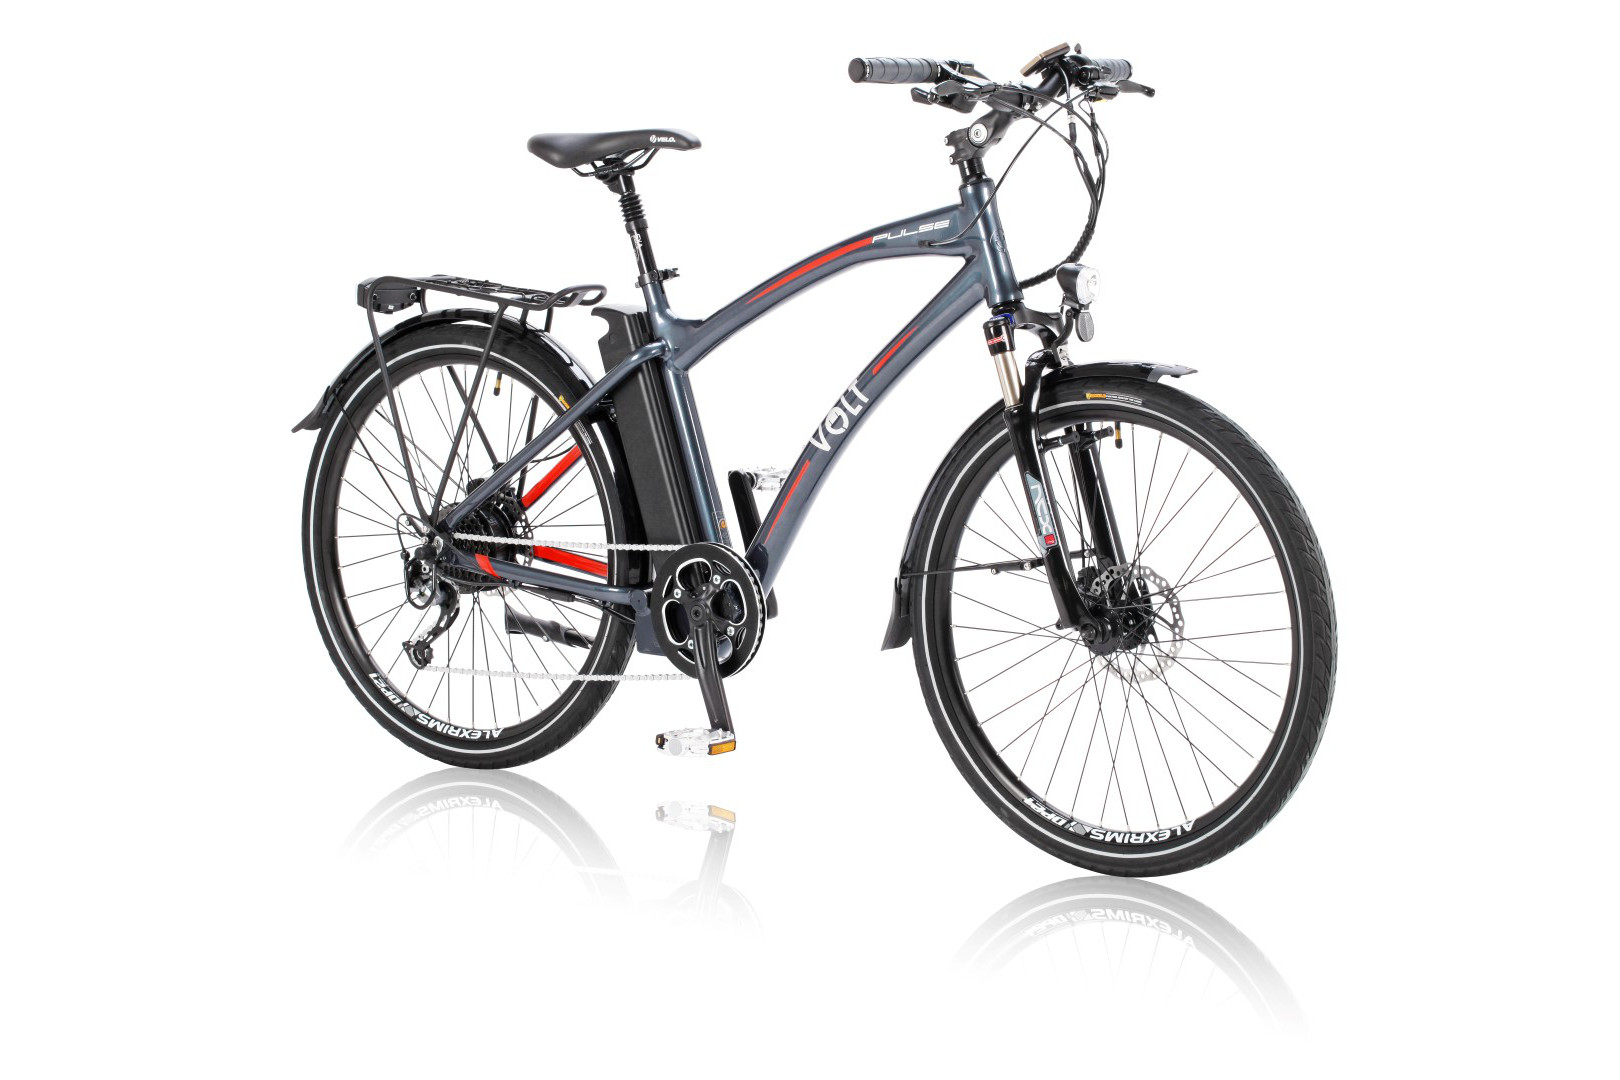 Pulse Hybrid electric bike, studio photograph viewed at an angle with a white background